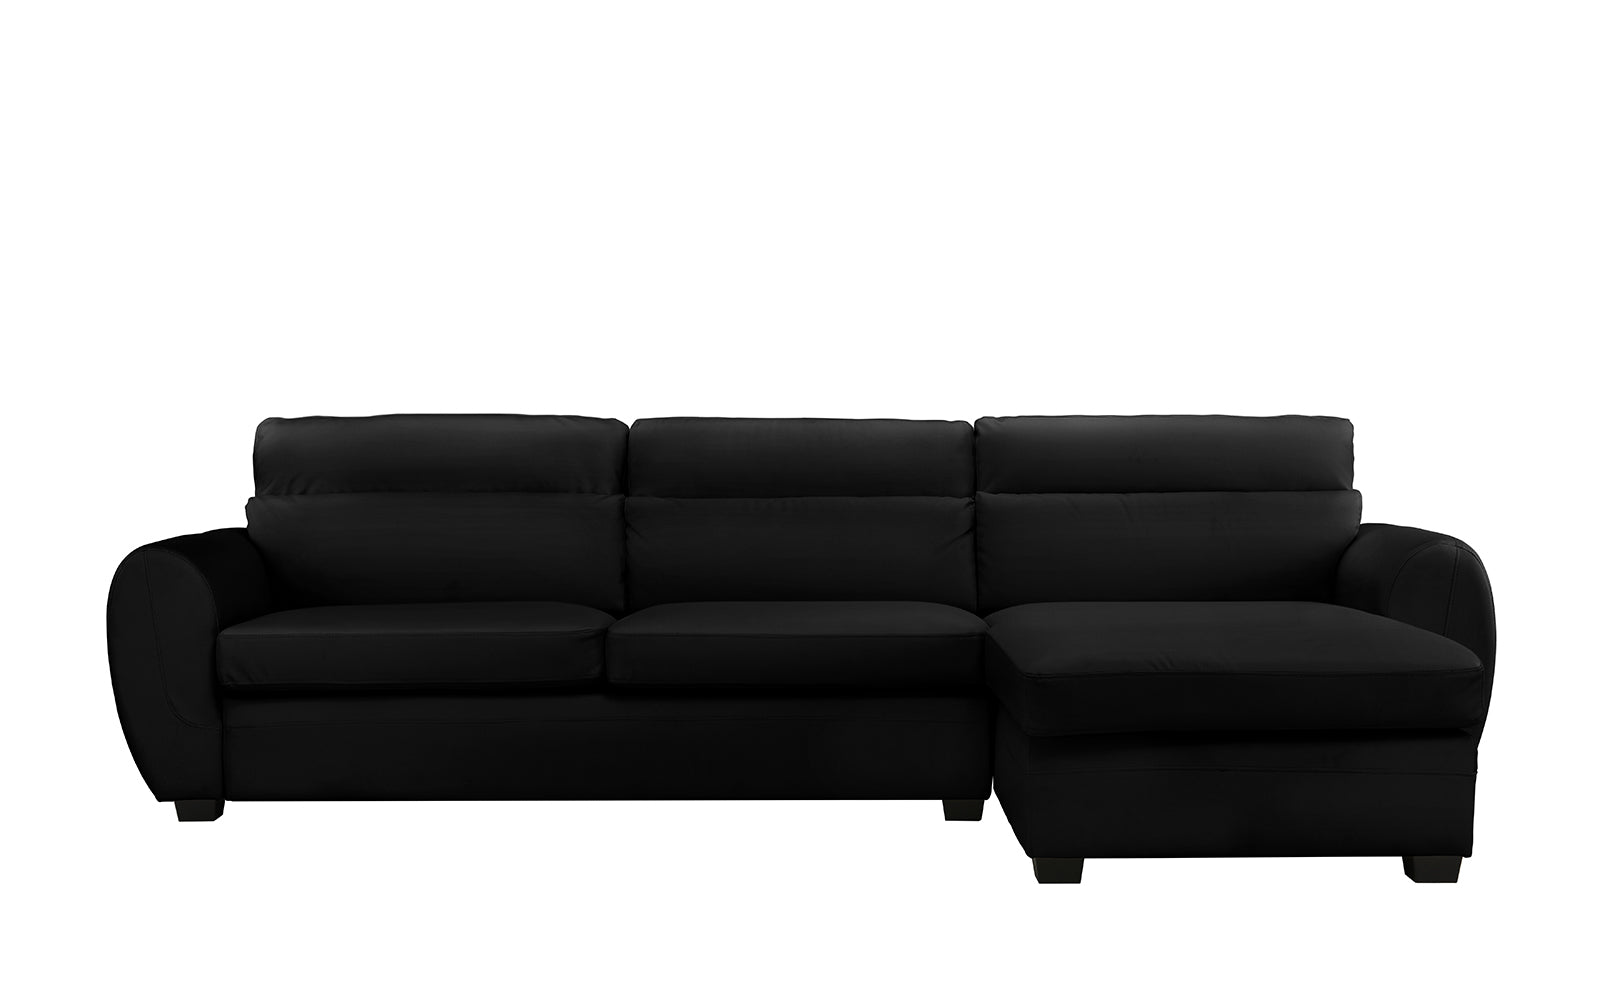 Zoe Modern Leather Sectional Sofa with Chaise